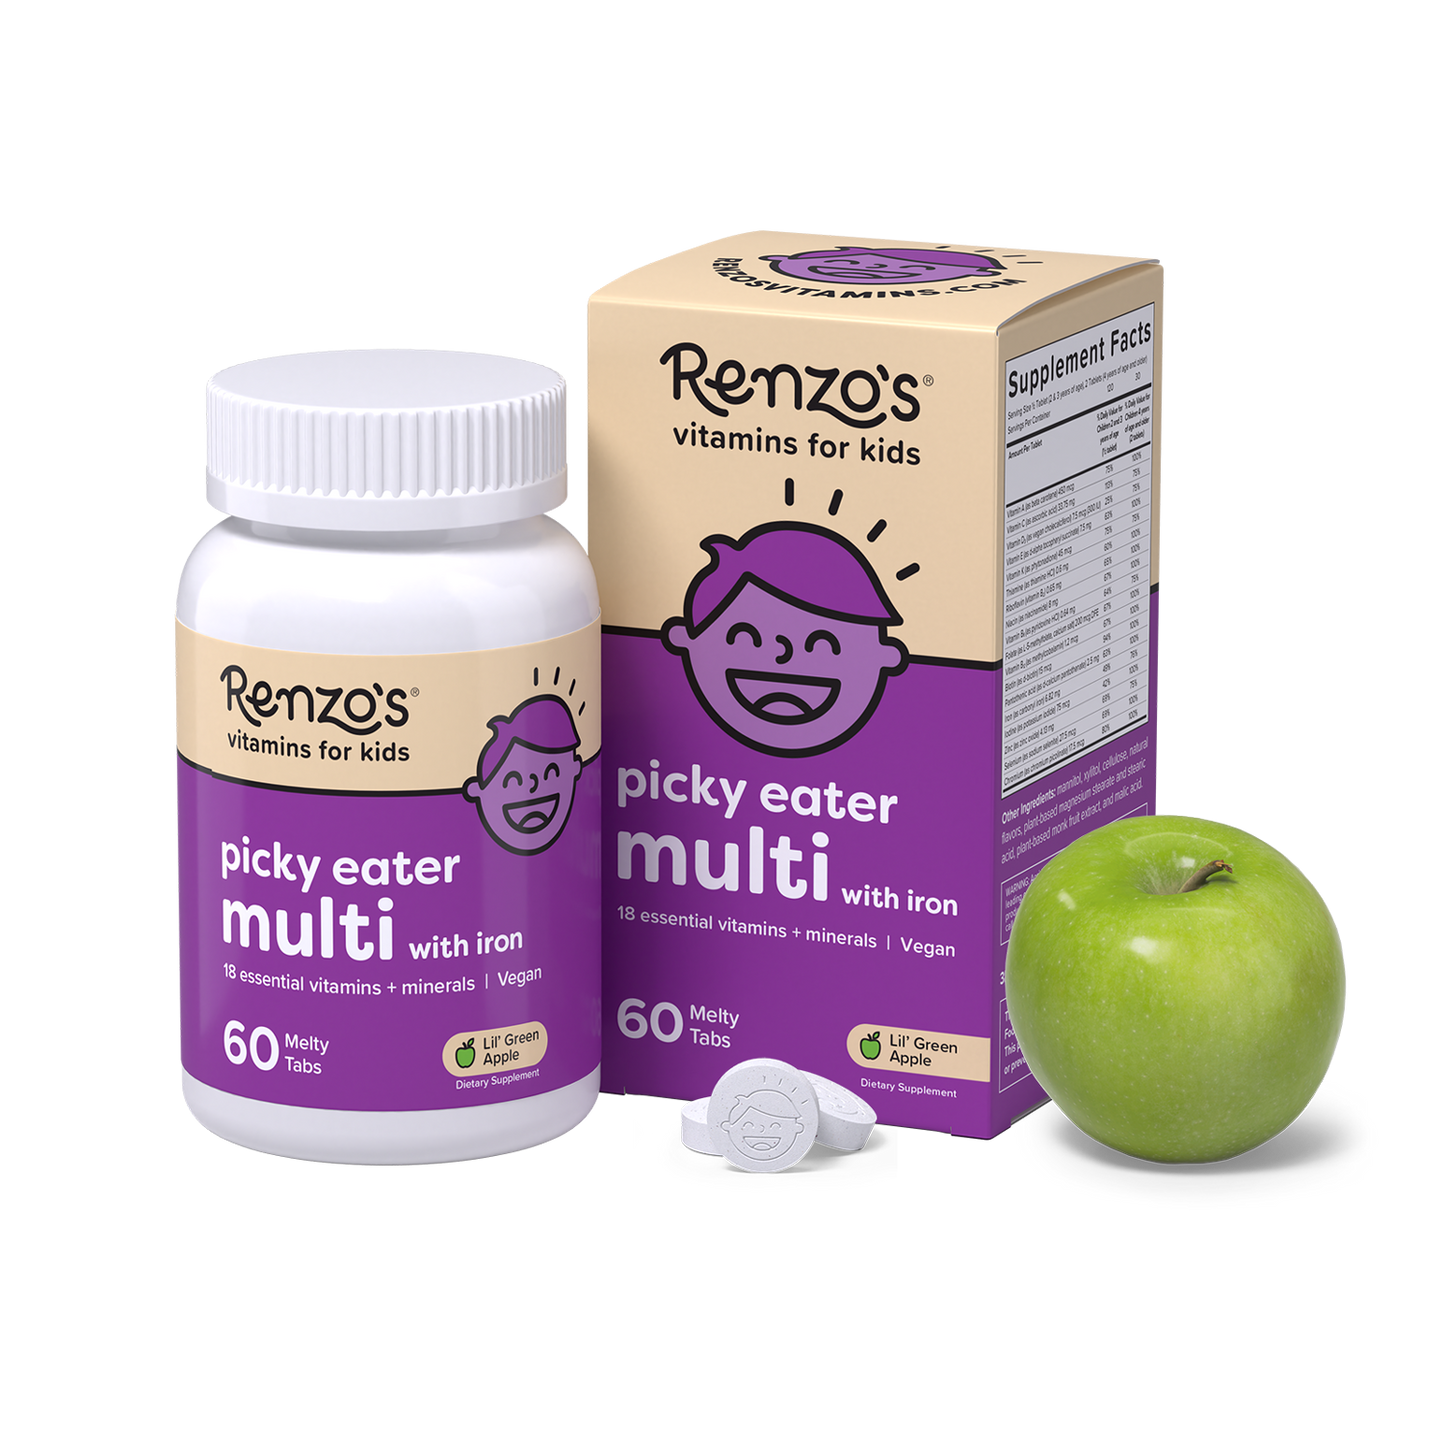 Renzo's Vitamins childrens multivitamin for picky eaters bottle and box upright on a white surface with the melty tablets displaying the Renzo's smiling kid logo and a green apple laying beside. This is the apple-flavored multivitamin for kids with iron packaging